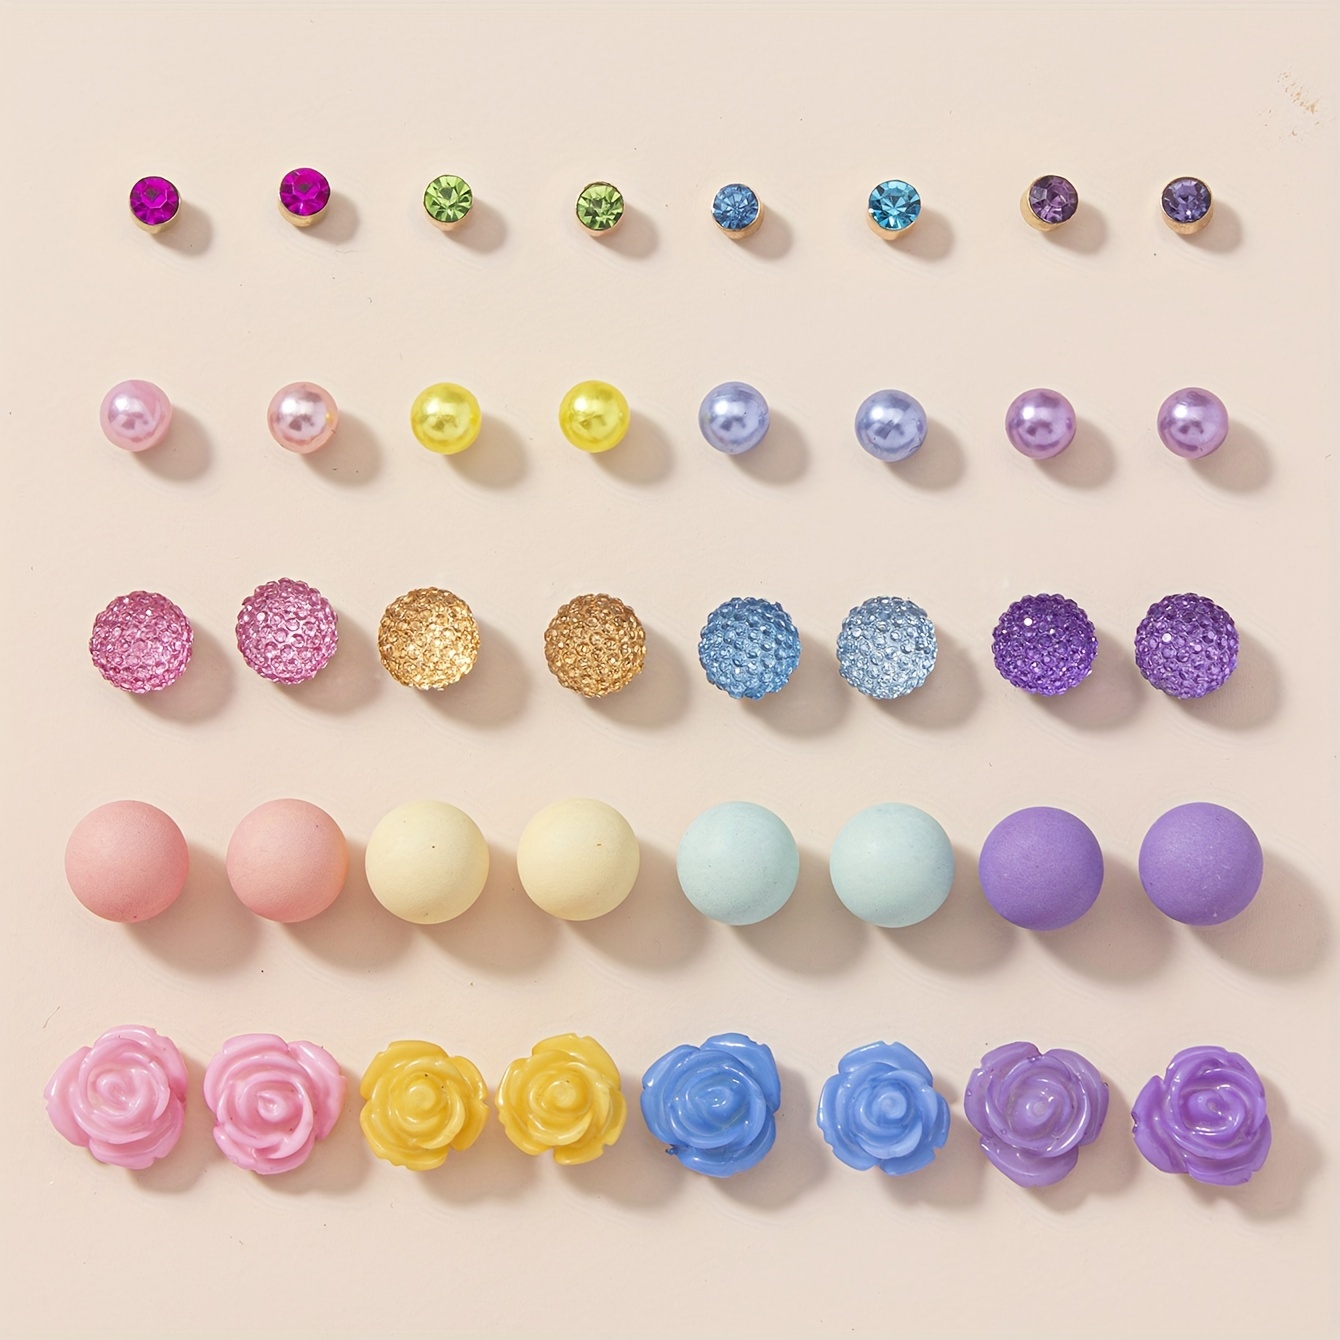 

20 Pairs Colorful Flower/ Faux Pearl/ Shiny Rhinestone Design Stud Earrings Elegant Sexy Style Trendy Female Gift